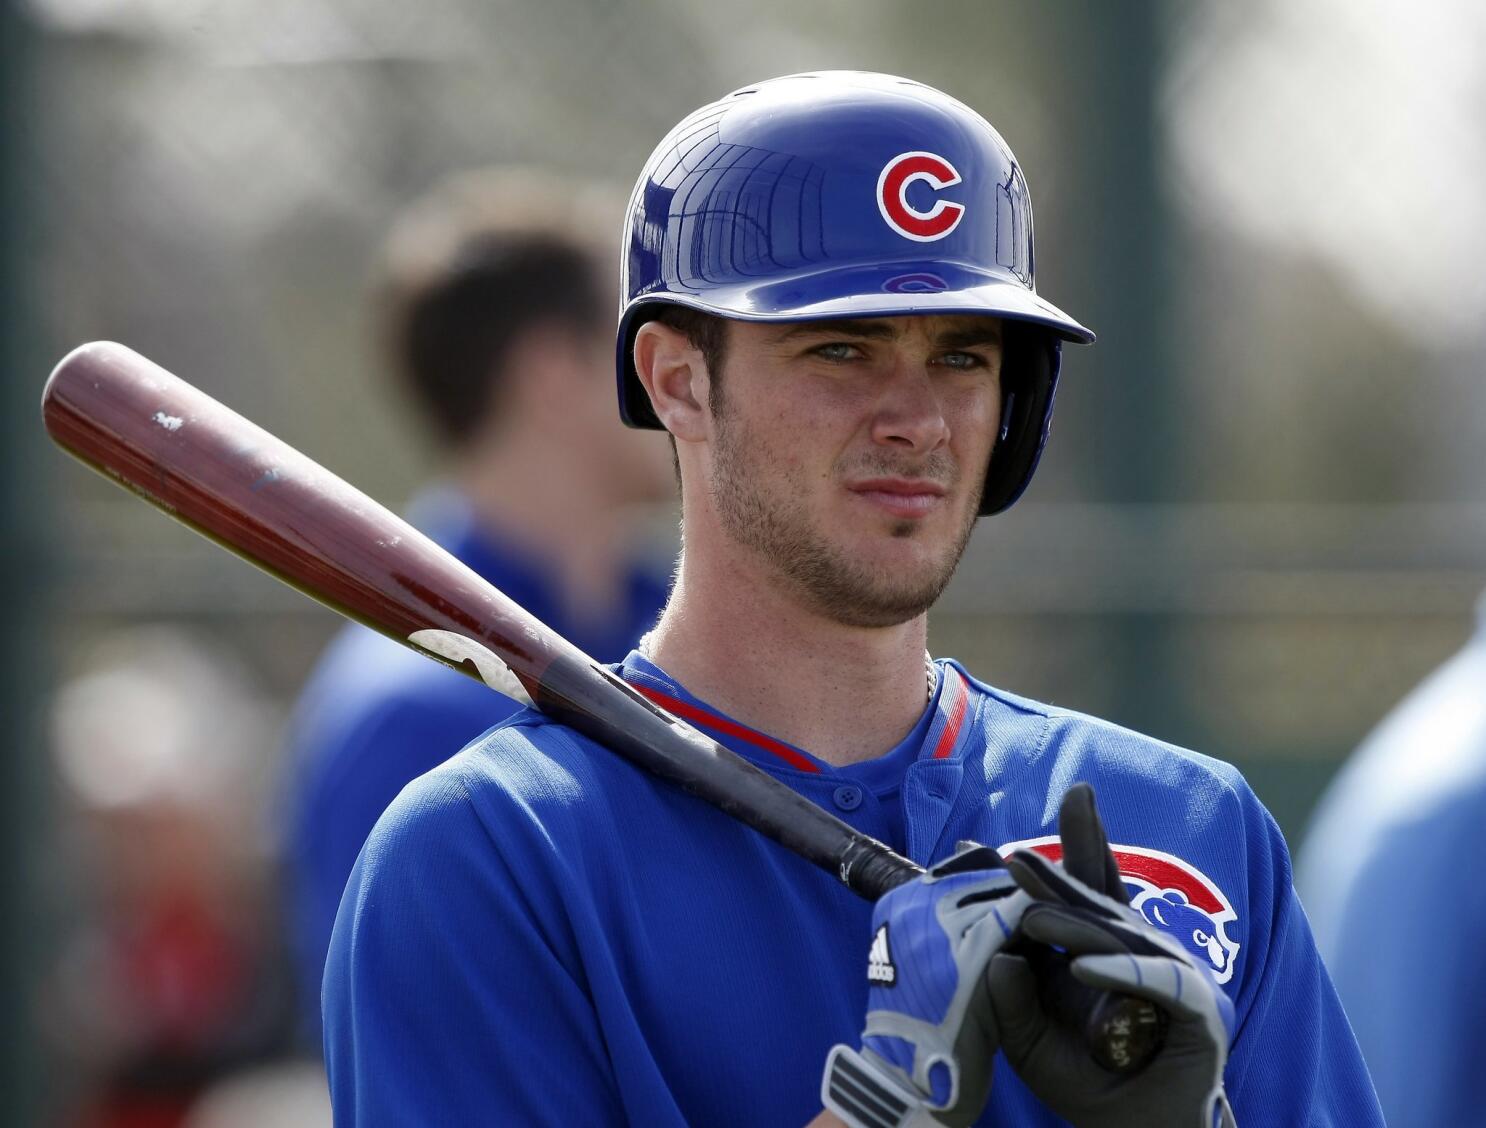 Stories you didn't know about Kris Bryant, Anthony Rizzo and other